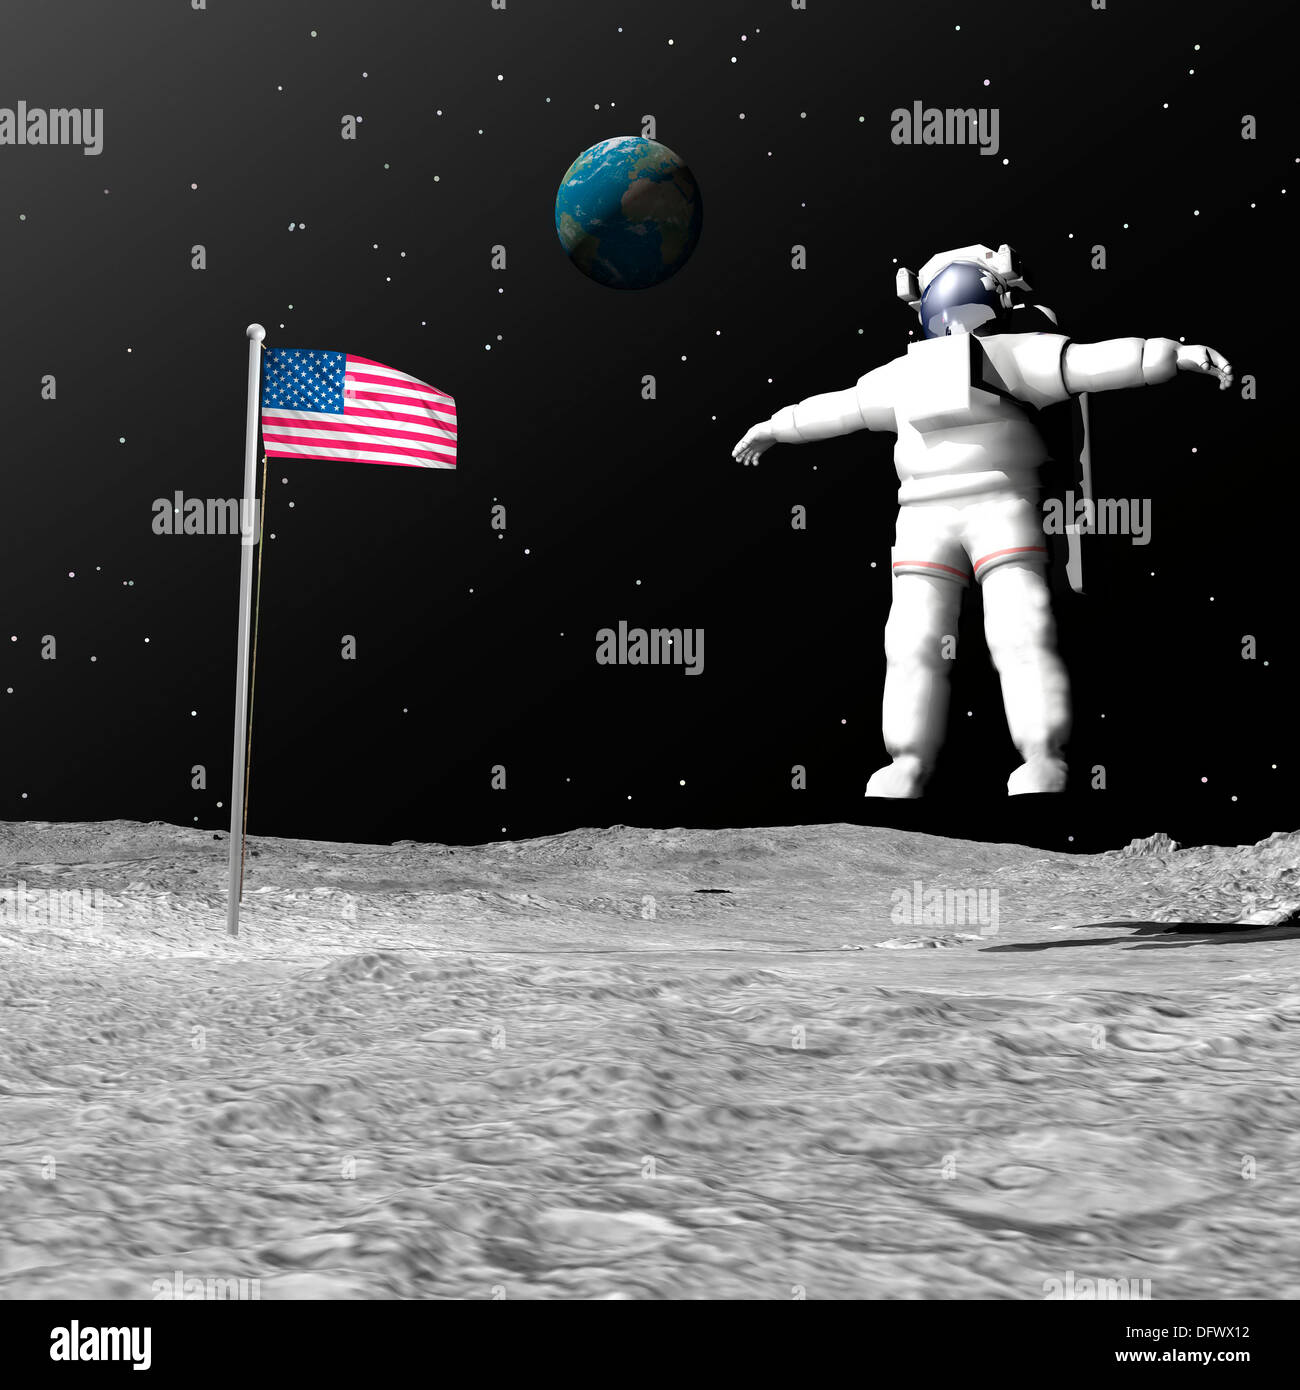 First astronaut on the moon floating next to American flag with Earth in the background. Stock Photo